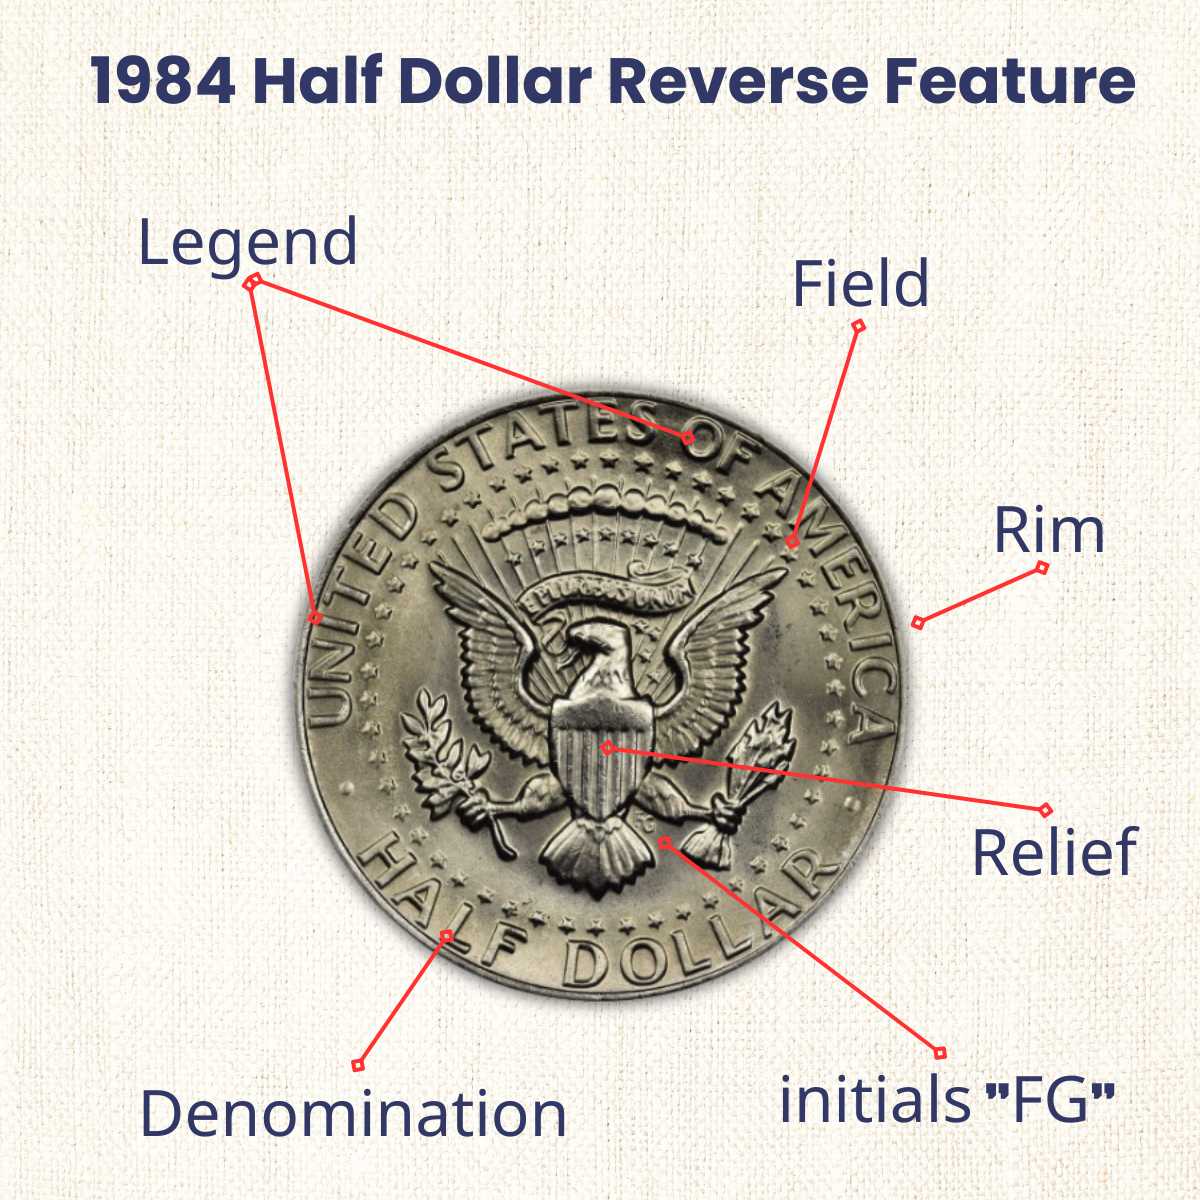 1984 Half Dollar Reverse Design and Features